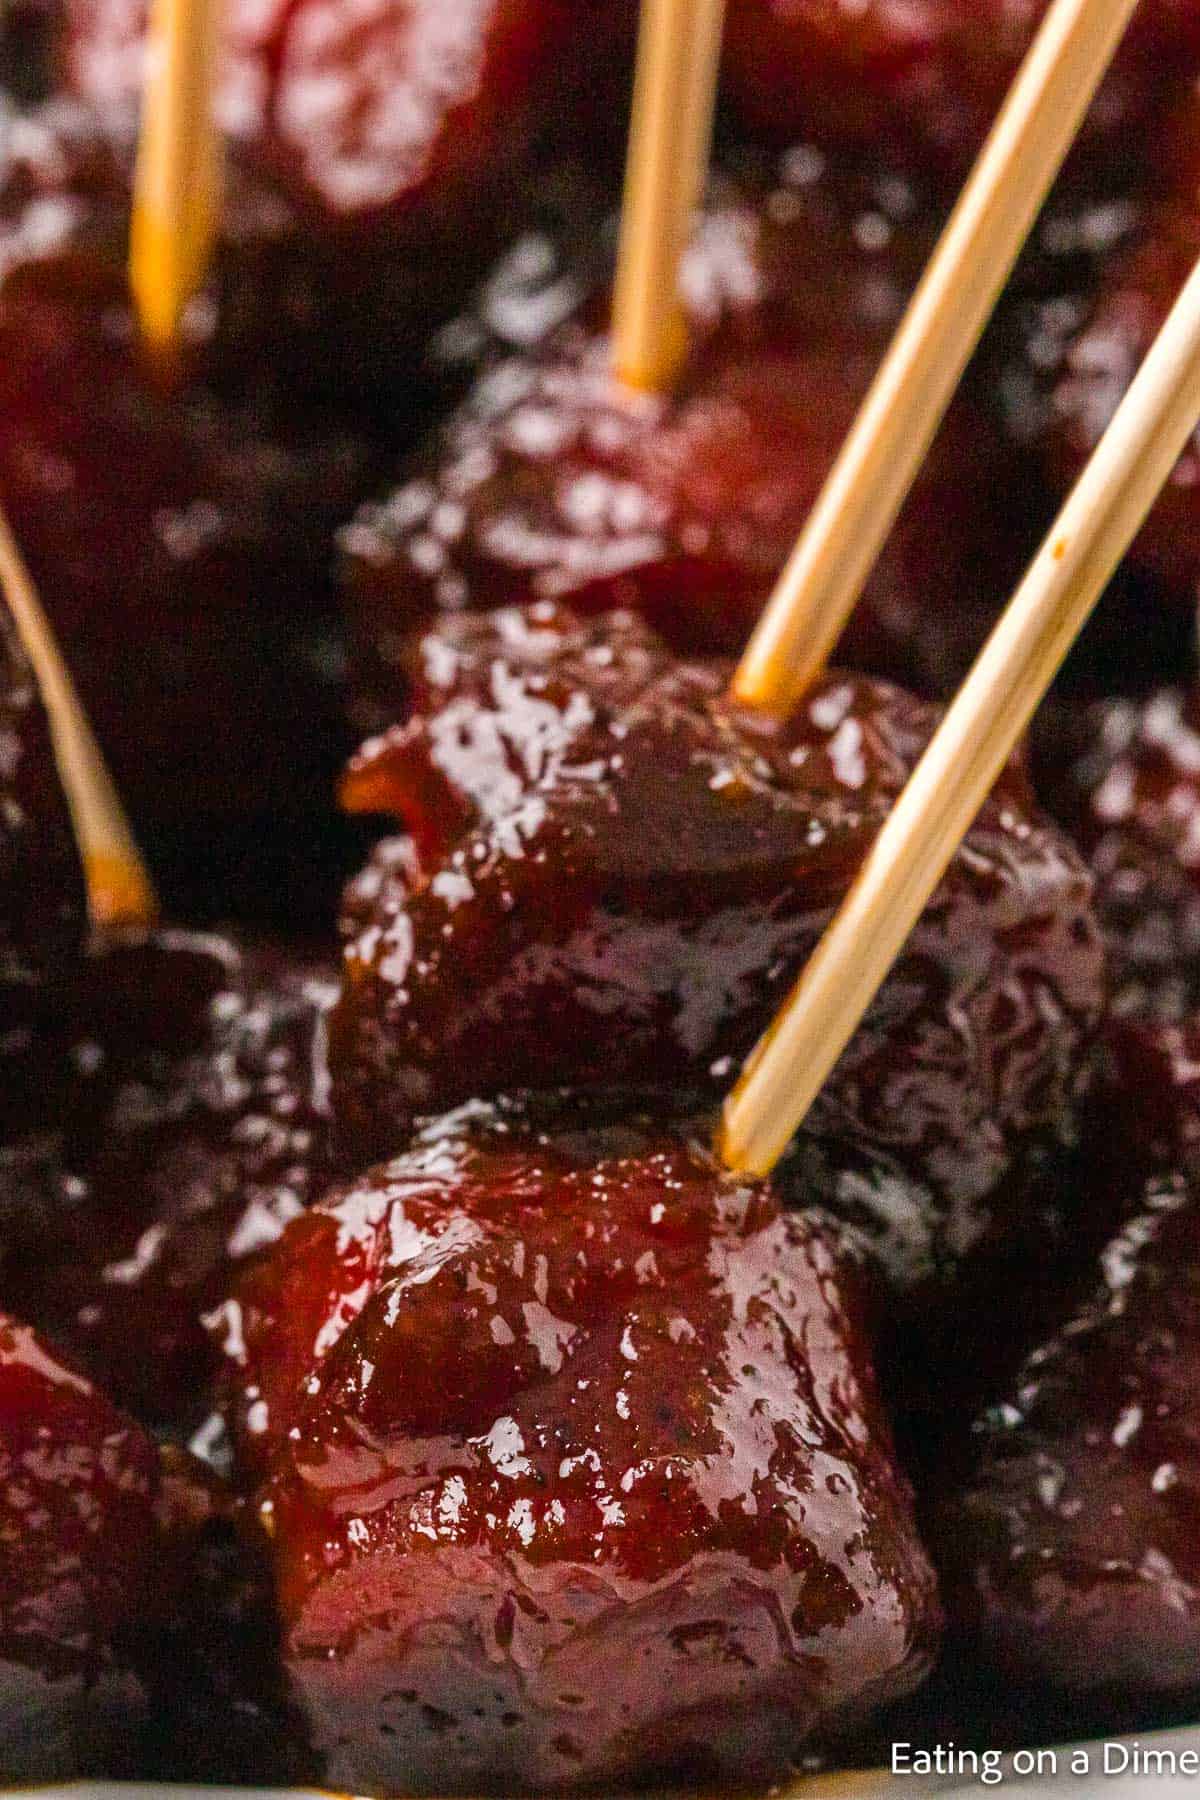 Burnt ends with toothpicks